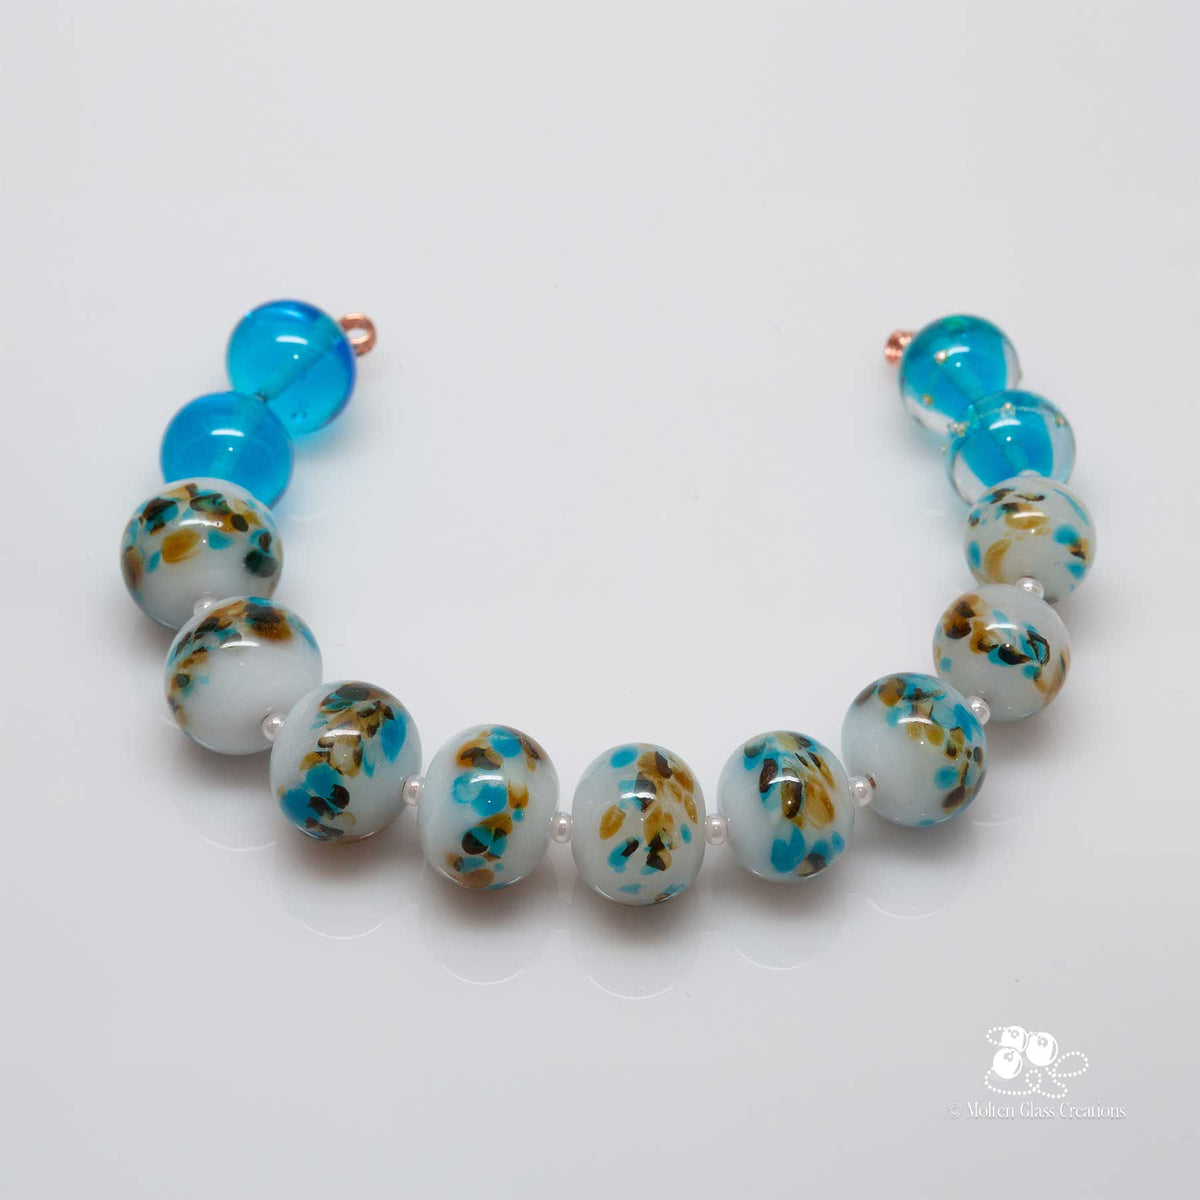 Bead set - Cloudy Day